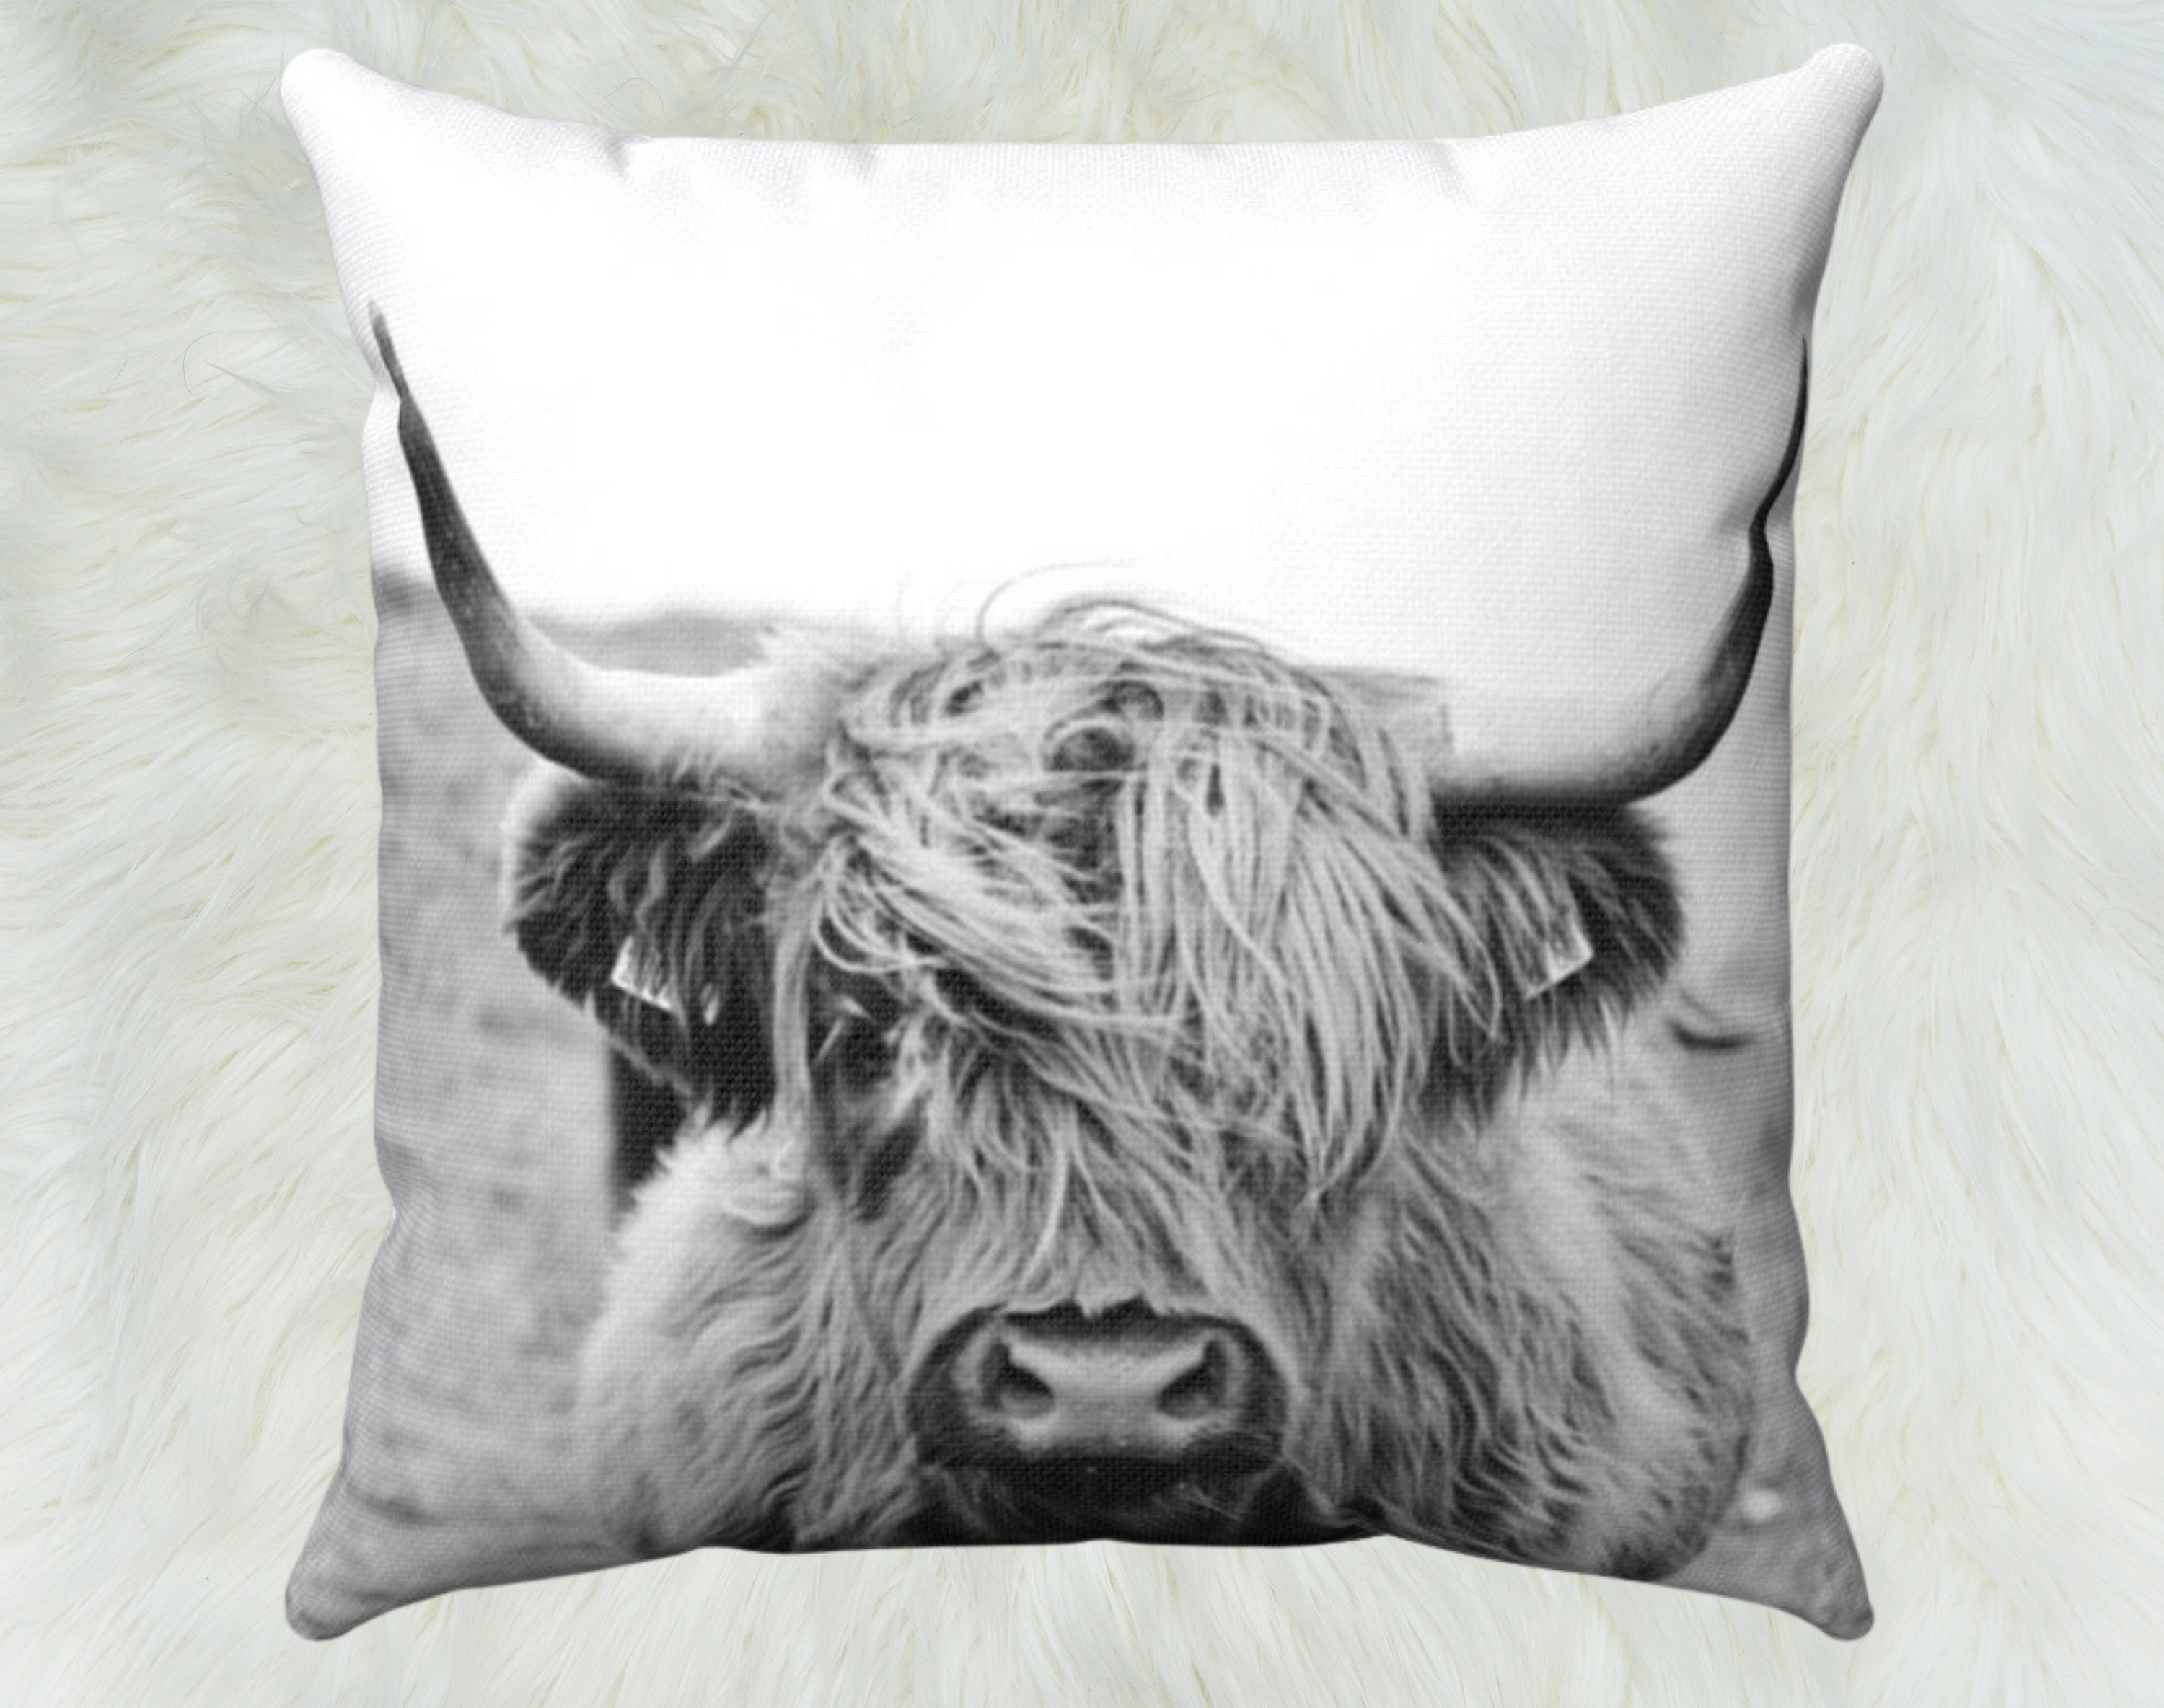 Highland Cow Throw Pillow Black and White Shaggy Cow Rustic | Etsy ...